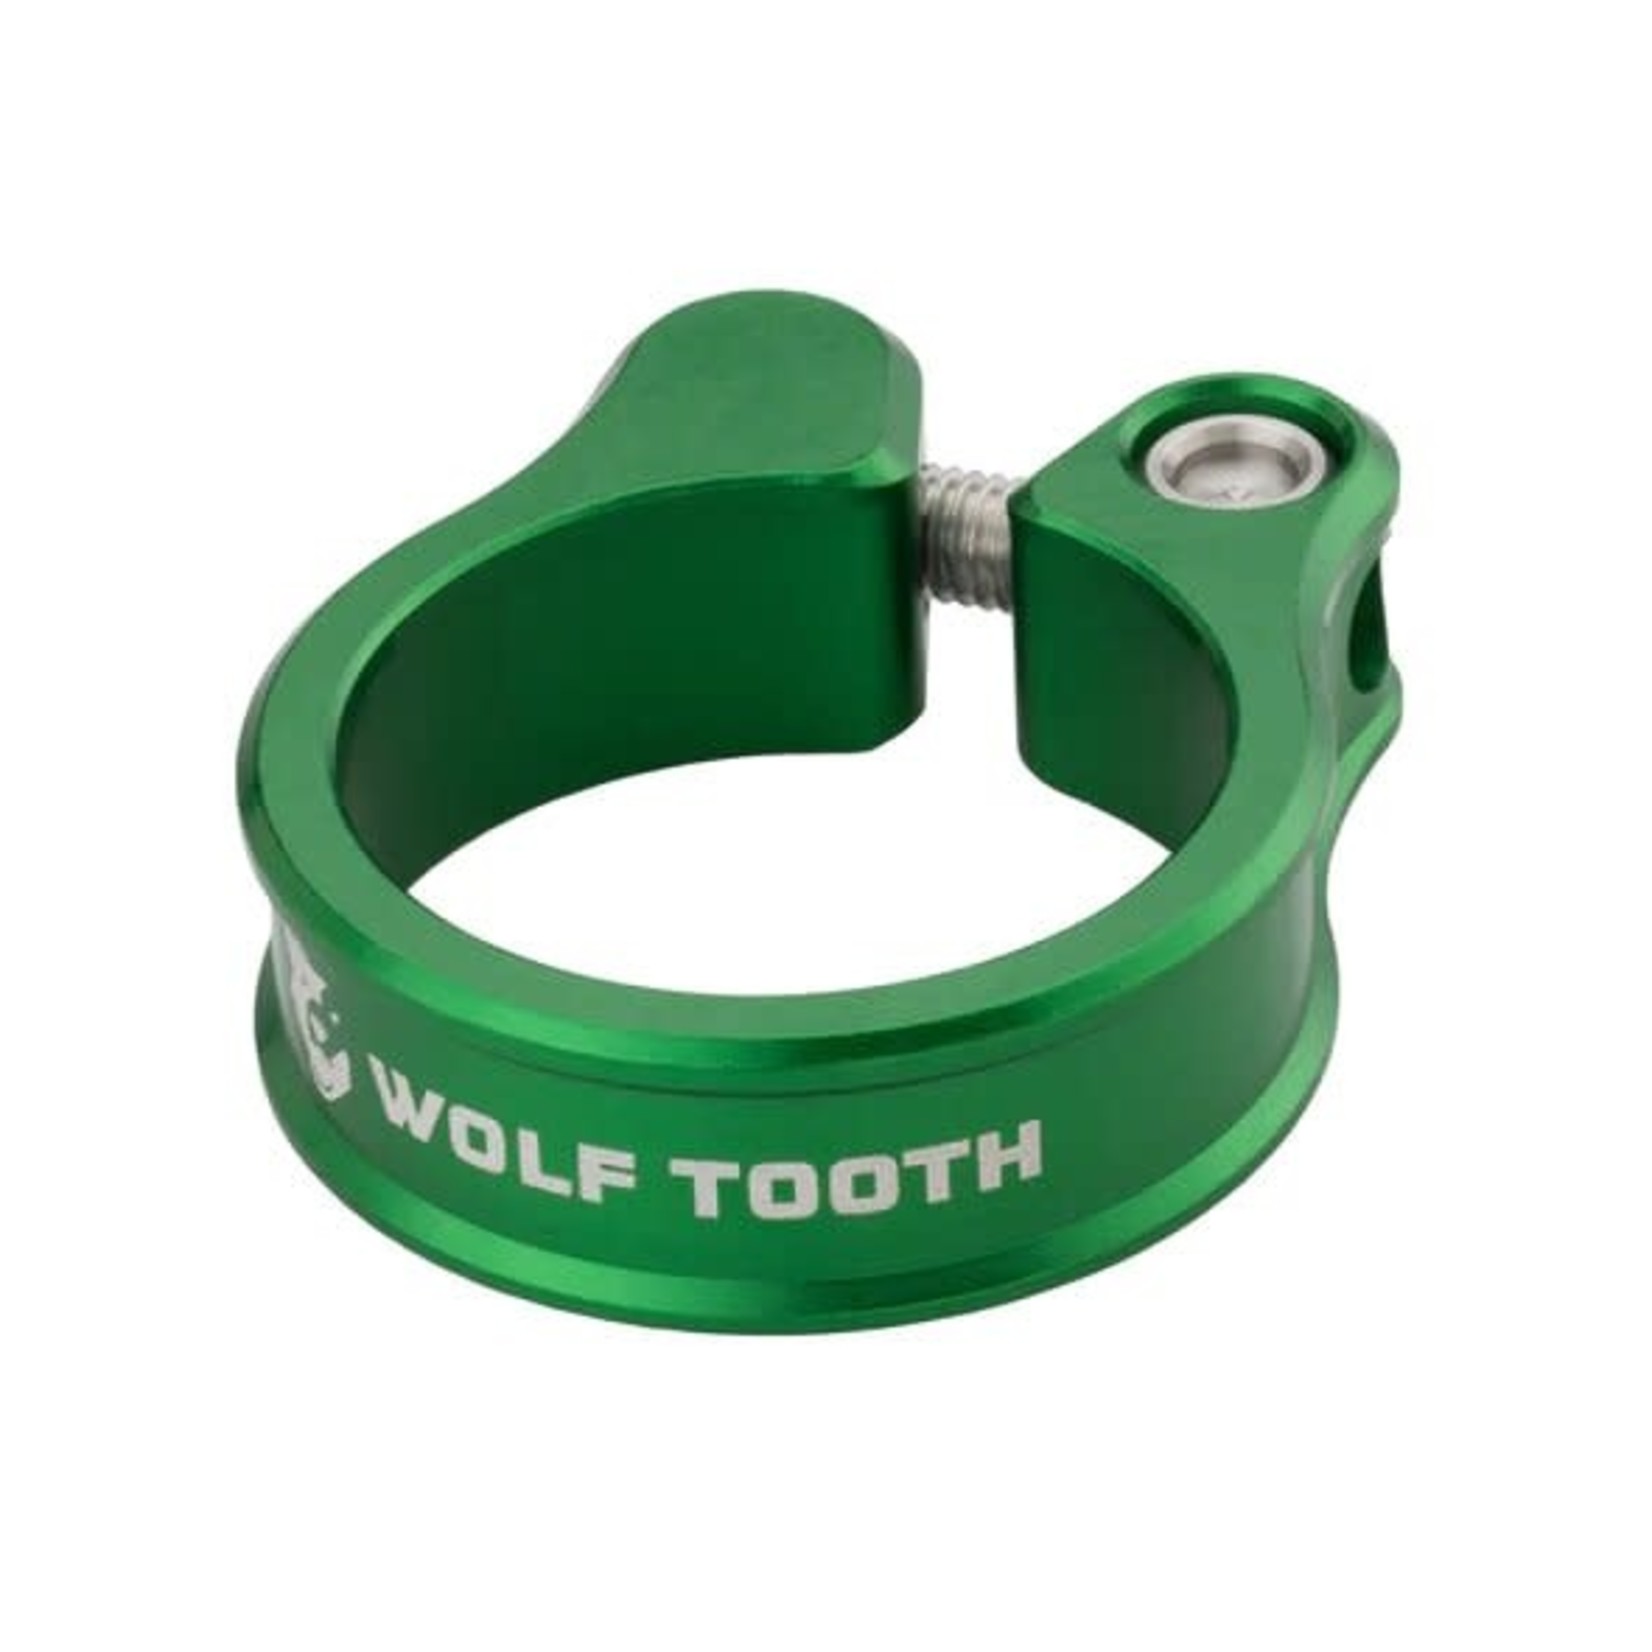 Wolf Tooth Seatpost Clamp 34.9mm Green